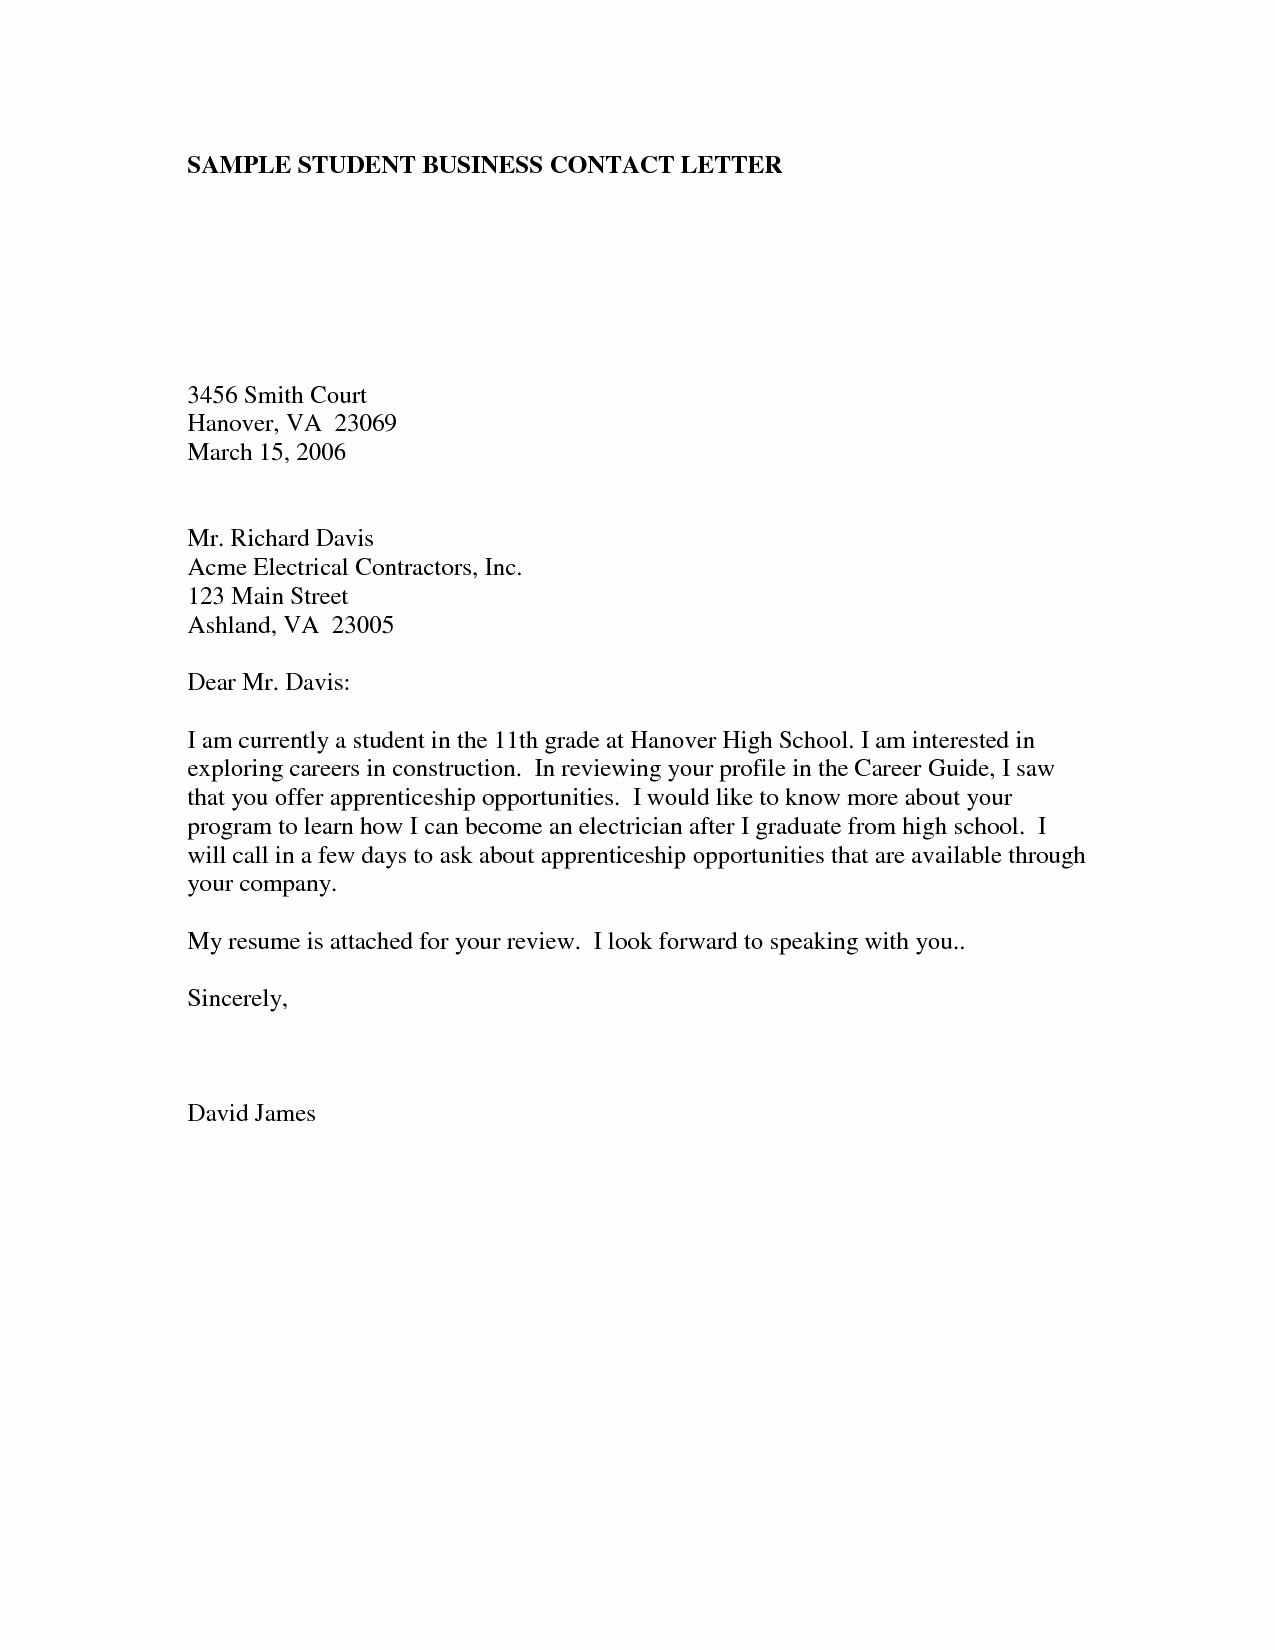 Business Letter Example for Students Unique formal Letters Examples for Students